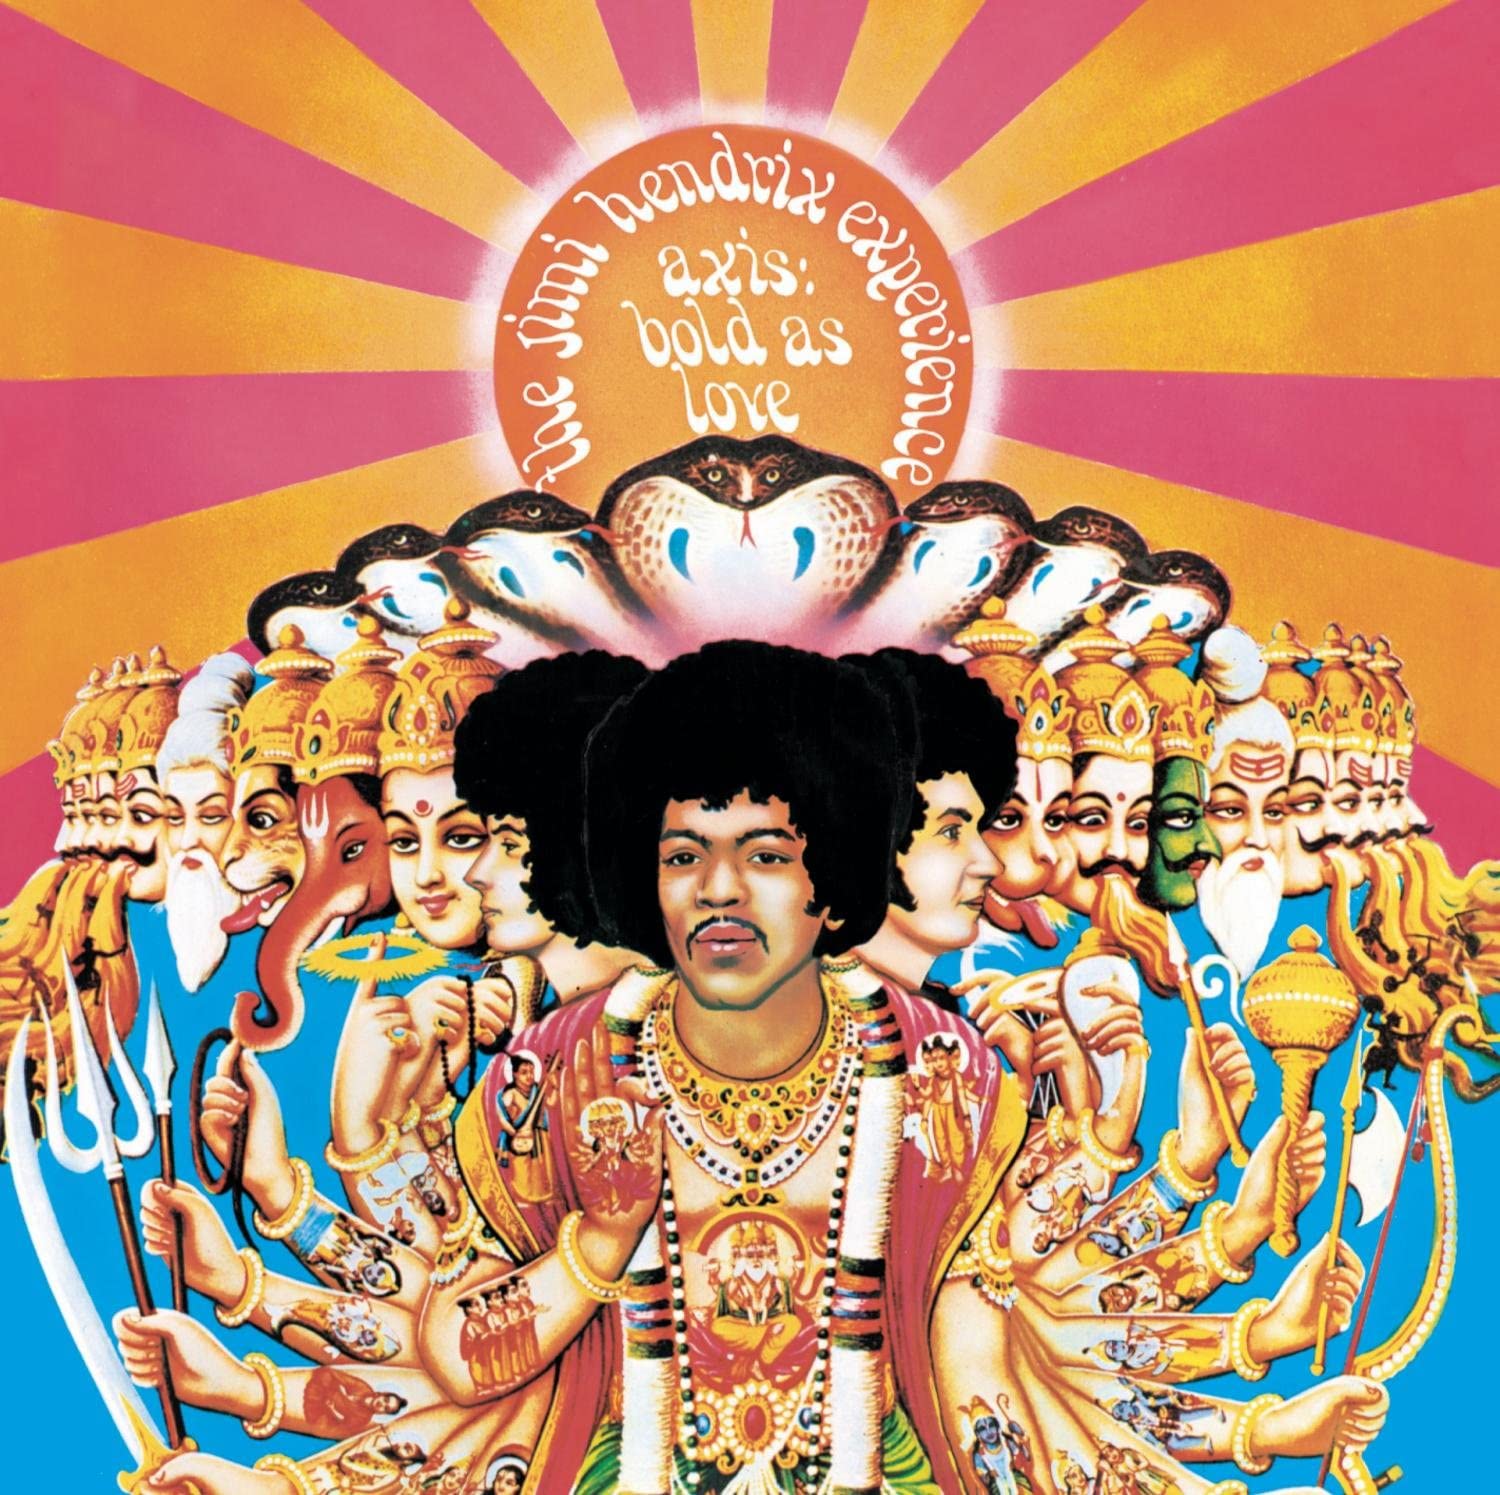 Axis: Bold as Love album cover by The Jimi Hendrix Experience | By Kerwin pop art